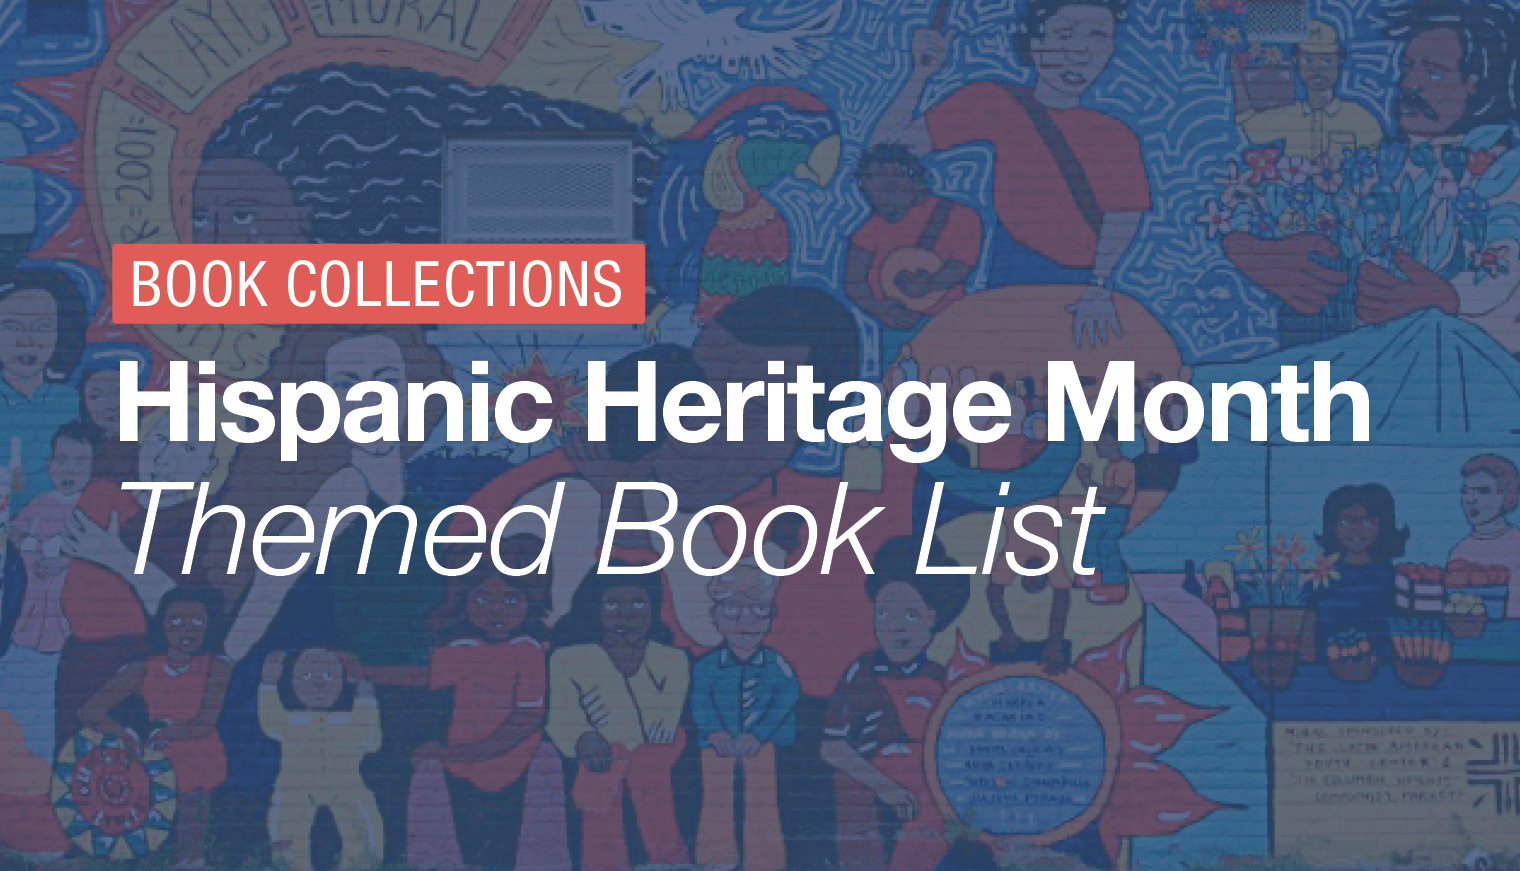 Featured image for “Hispanic Heritage Month – Book Collection”